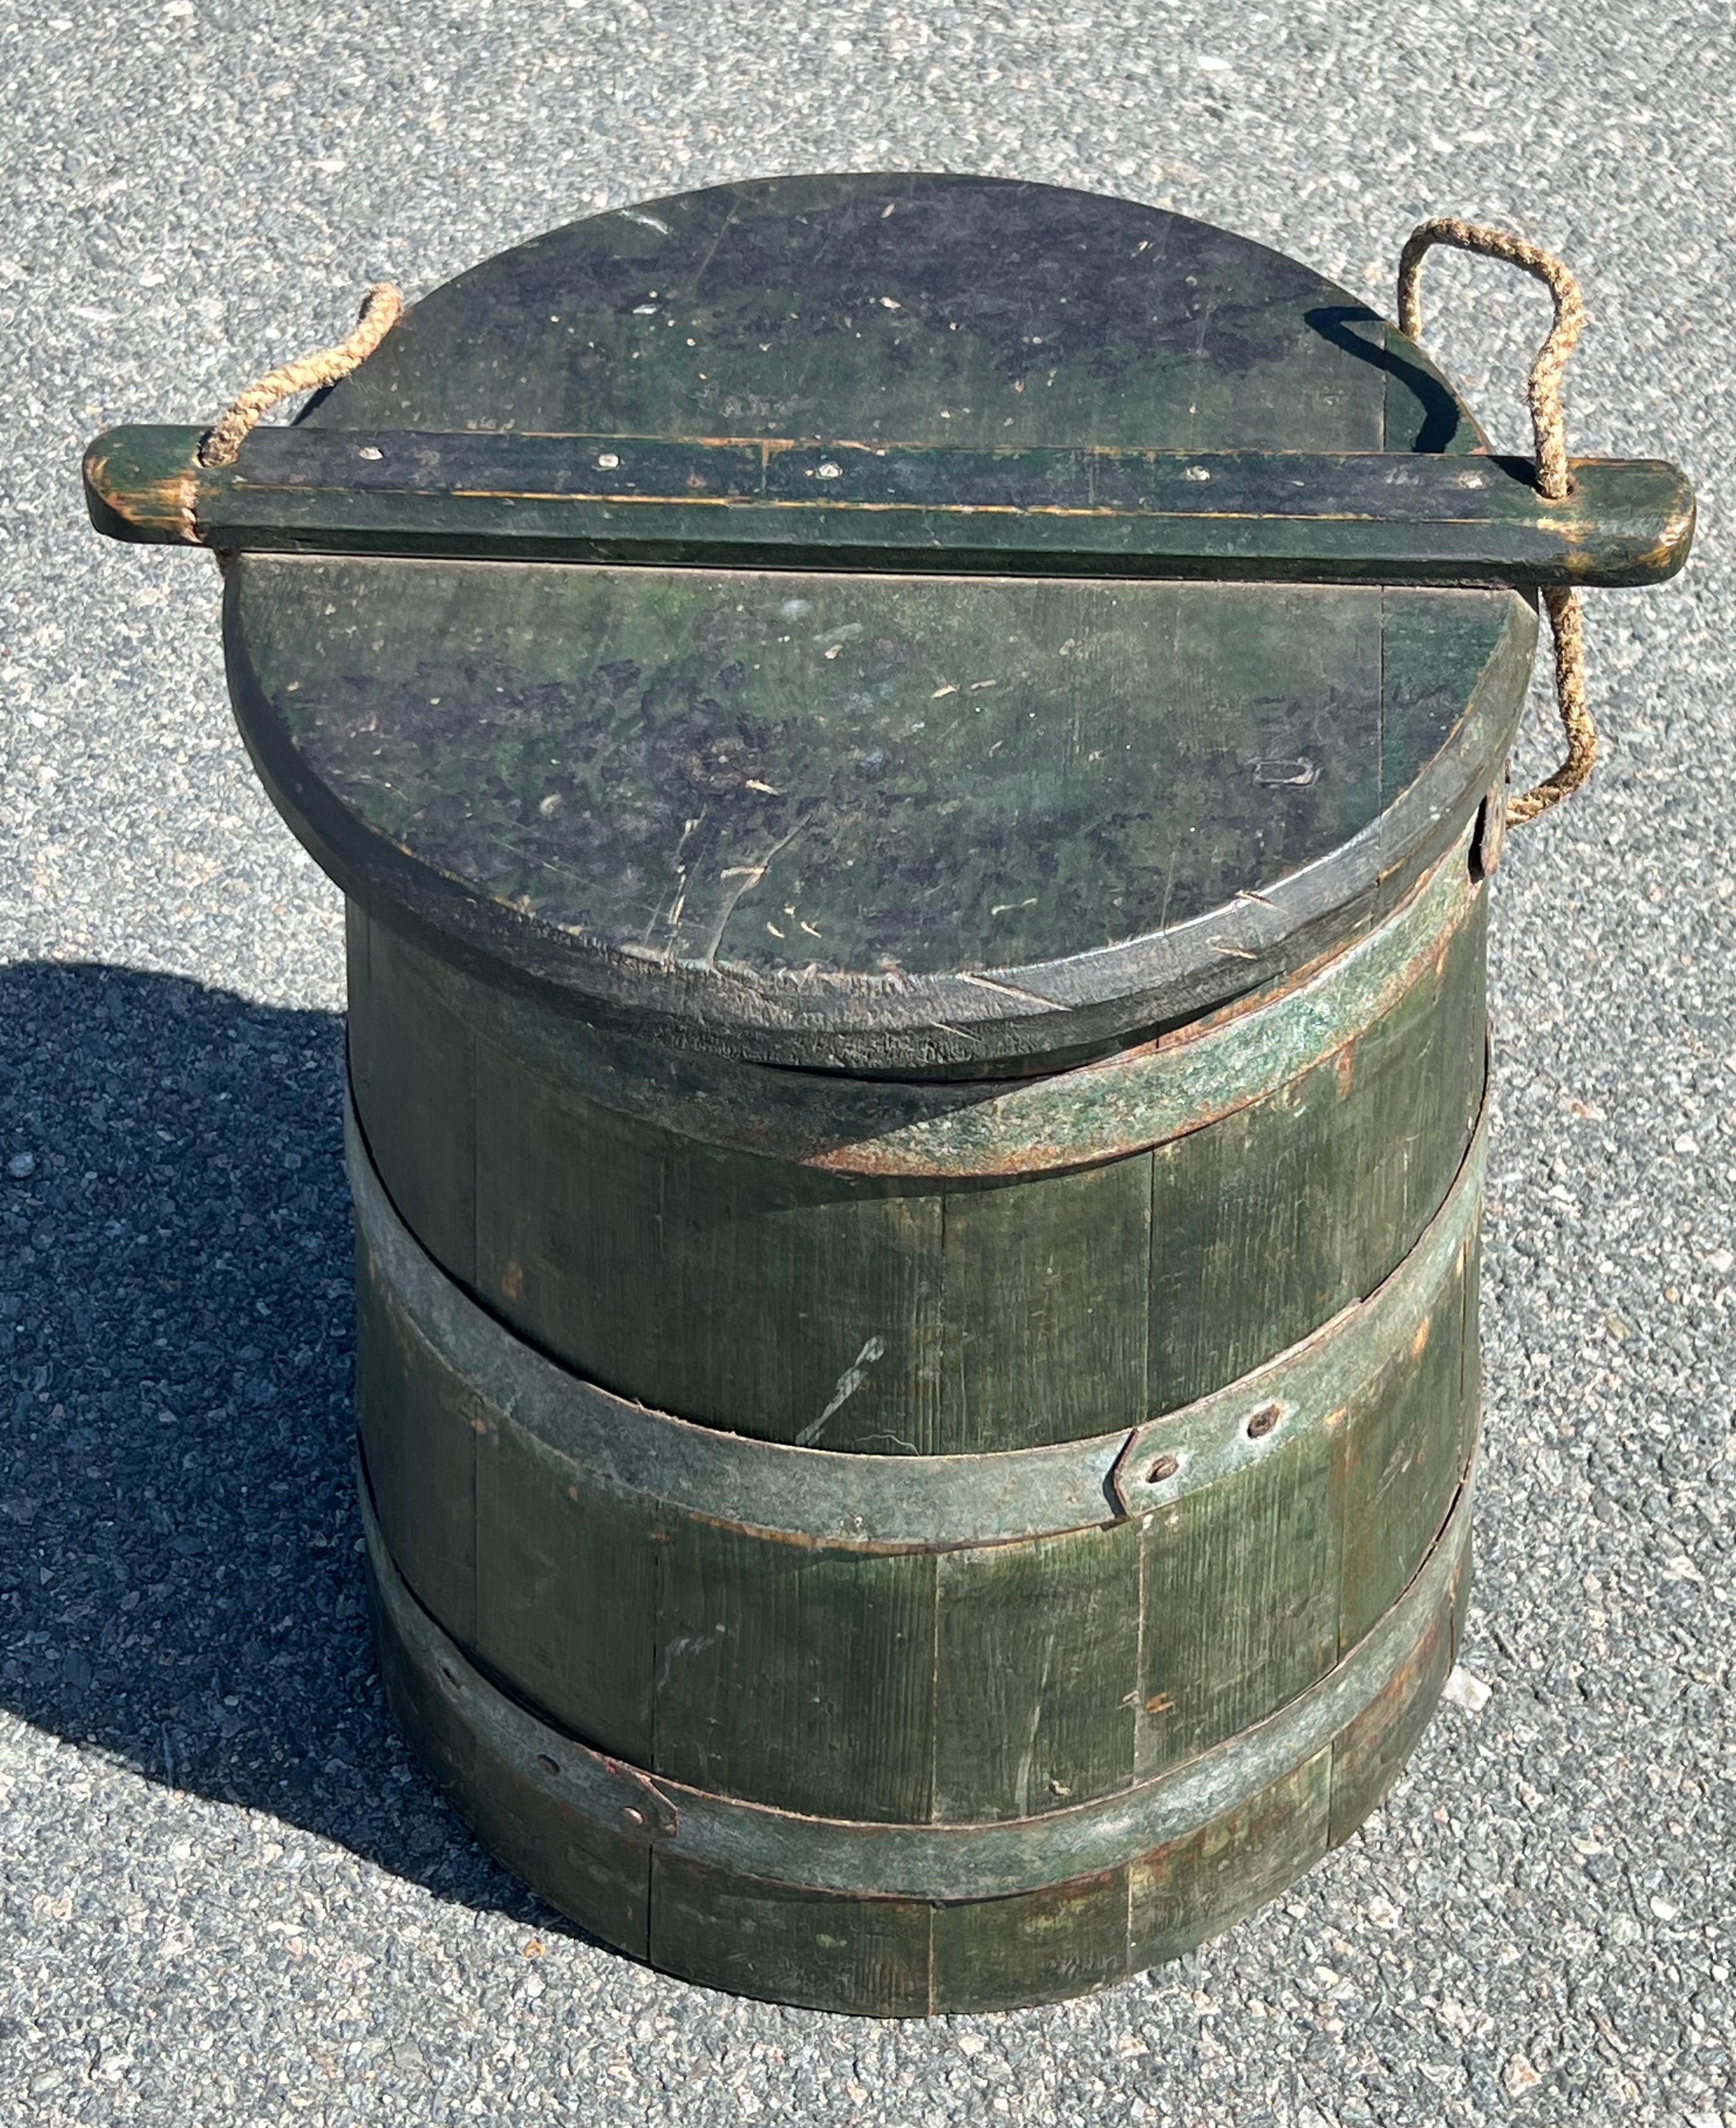 19th Century Wooden Bucket in original green paint, likely crafted by a cooper using slatted construction and metal banding, slide top with rope handle for covering items and transporting.